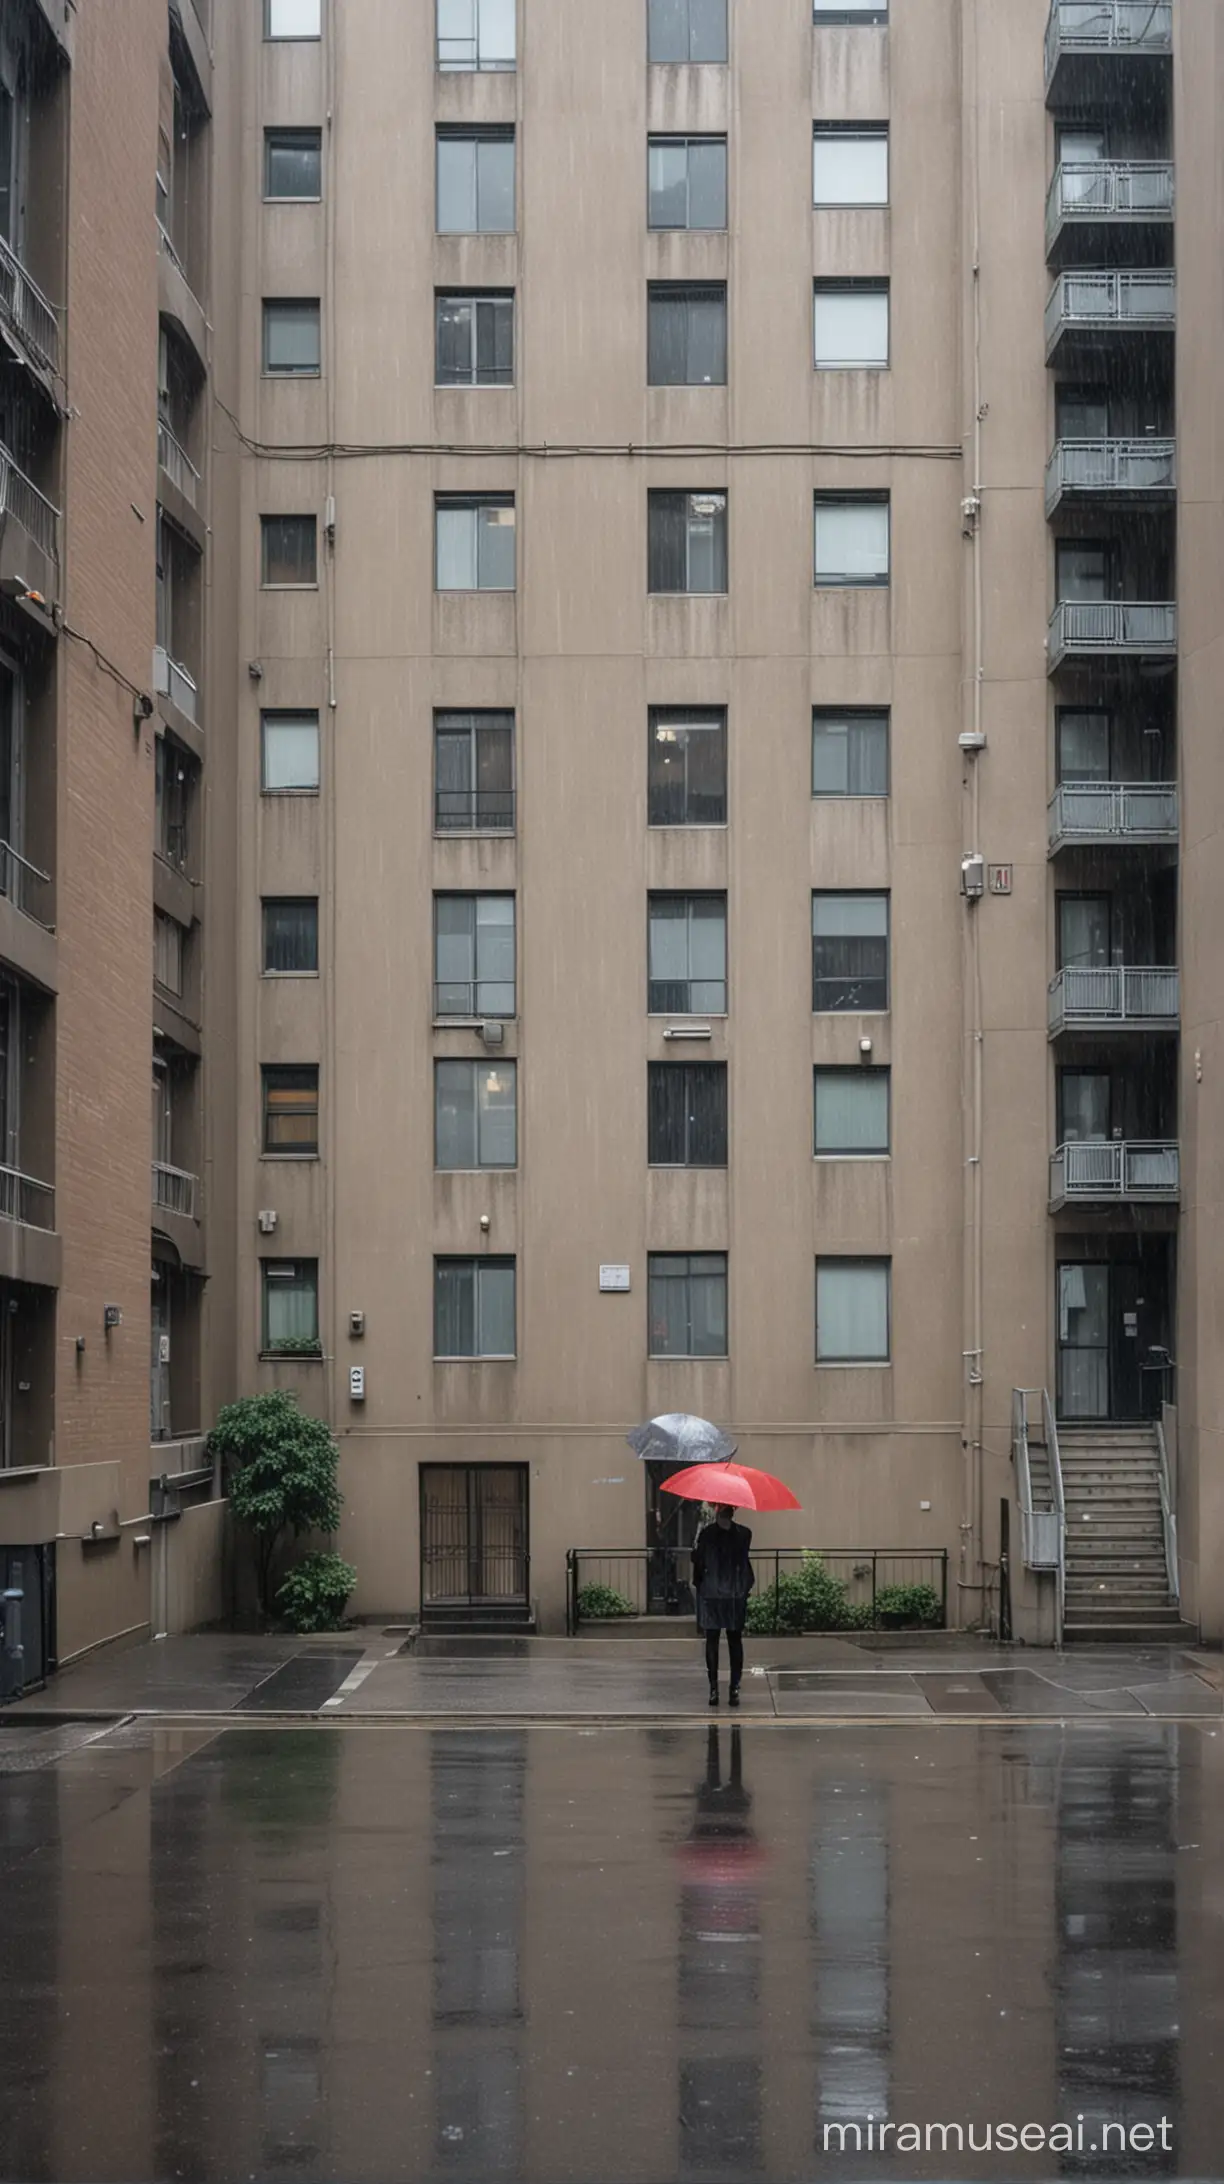 Scene of Gogo standing outside the building on a rainy day: Gogo is seen standing outside the building with an umbrella on a rainy day, looking up at the apartment building and contemplating whether to take the elevator or not.
